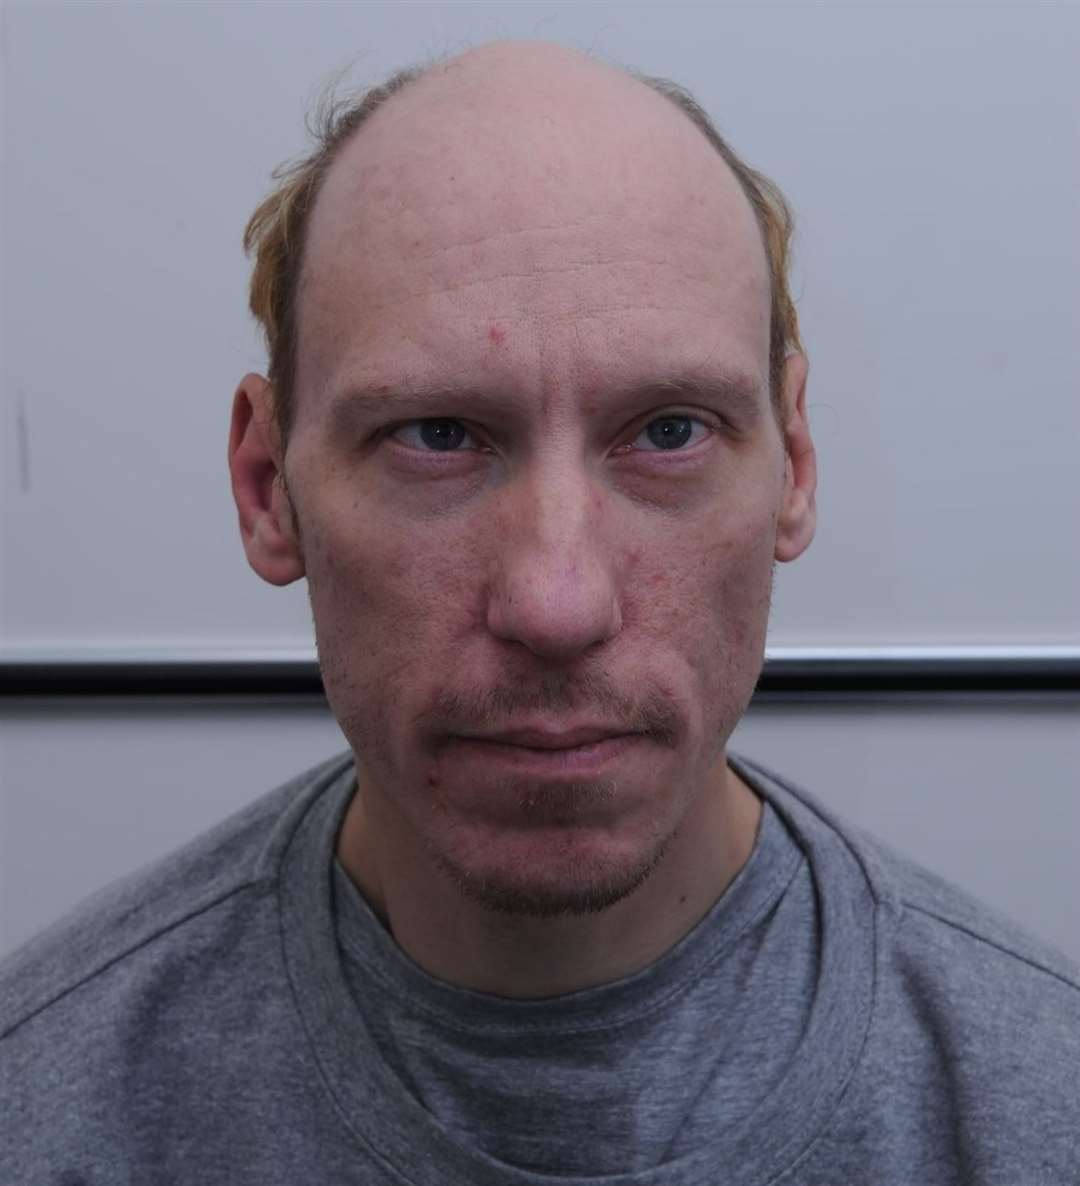 Stephen Port, who murdered four people